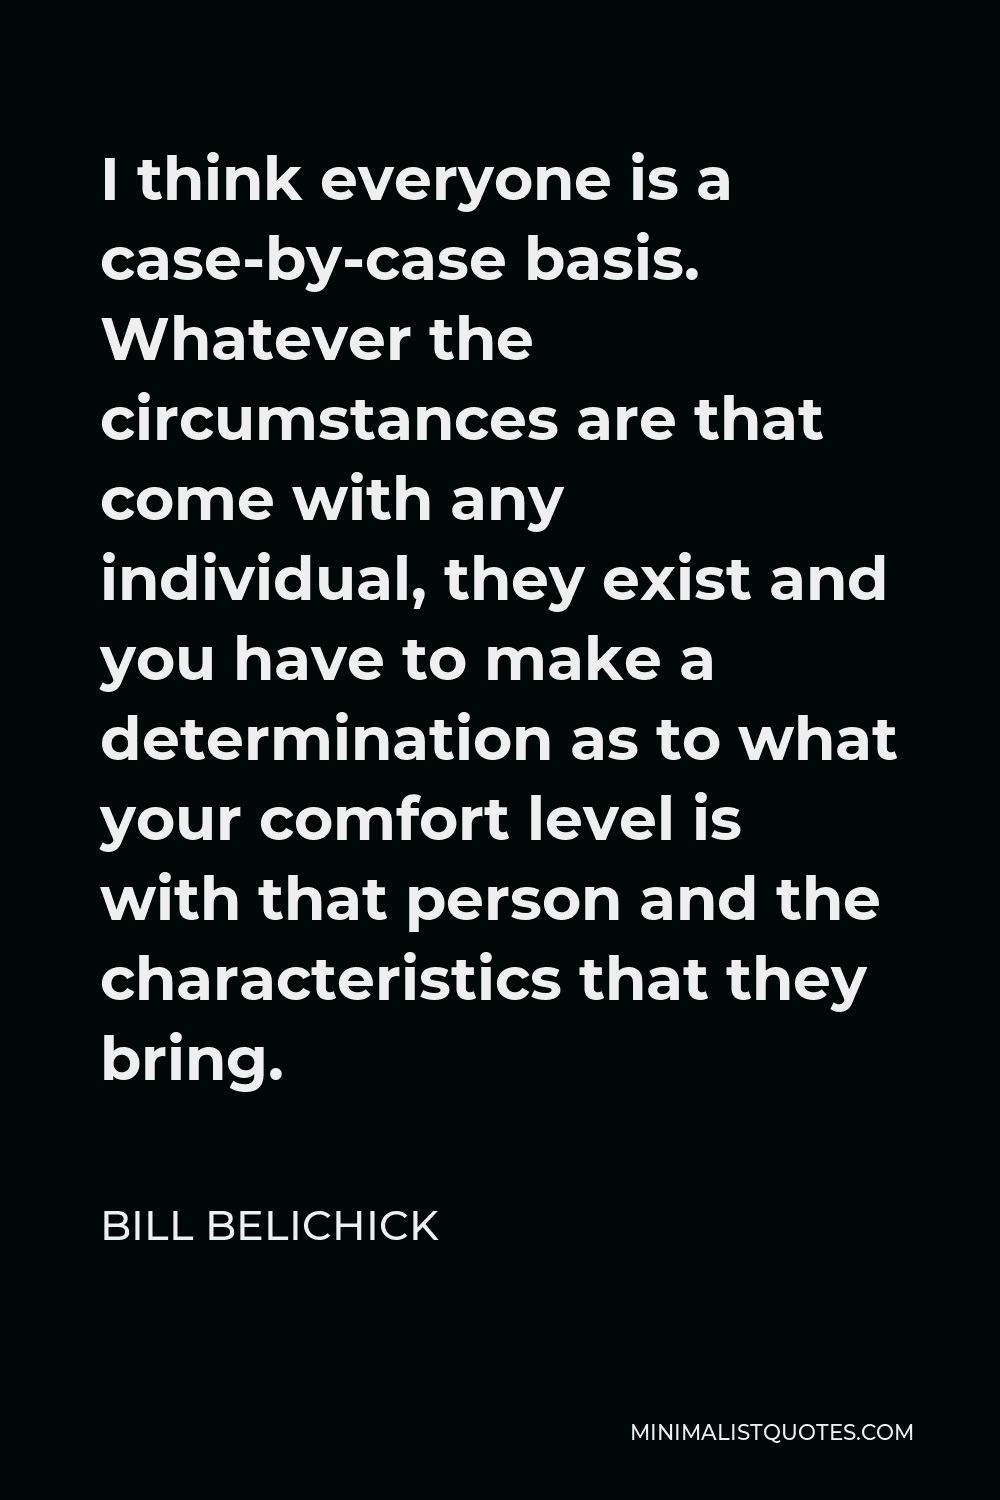 Bill Belichick Quote - I think everyone is a case-by-case basis. Whatever the circumstances are that come with any individual, they exist and you have to make a determination as to what your comfort level is with that person and the characteristics that they bring.